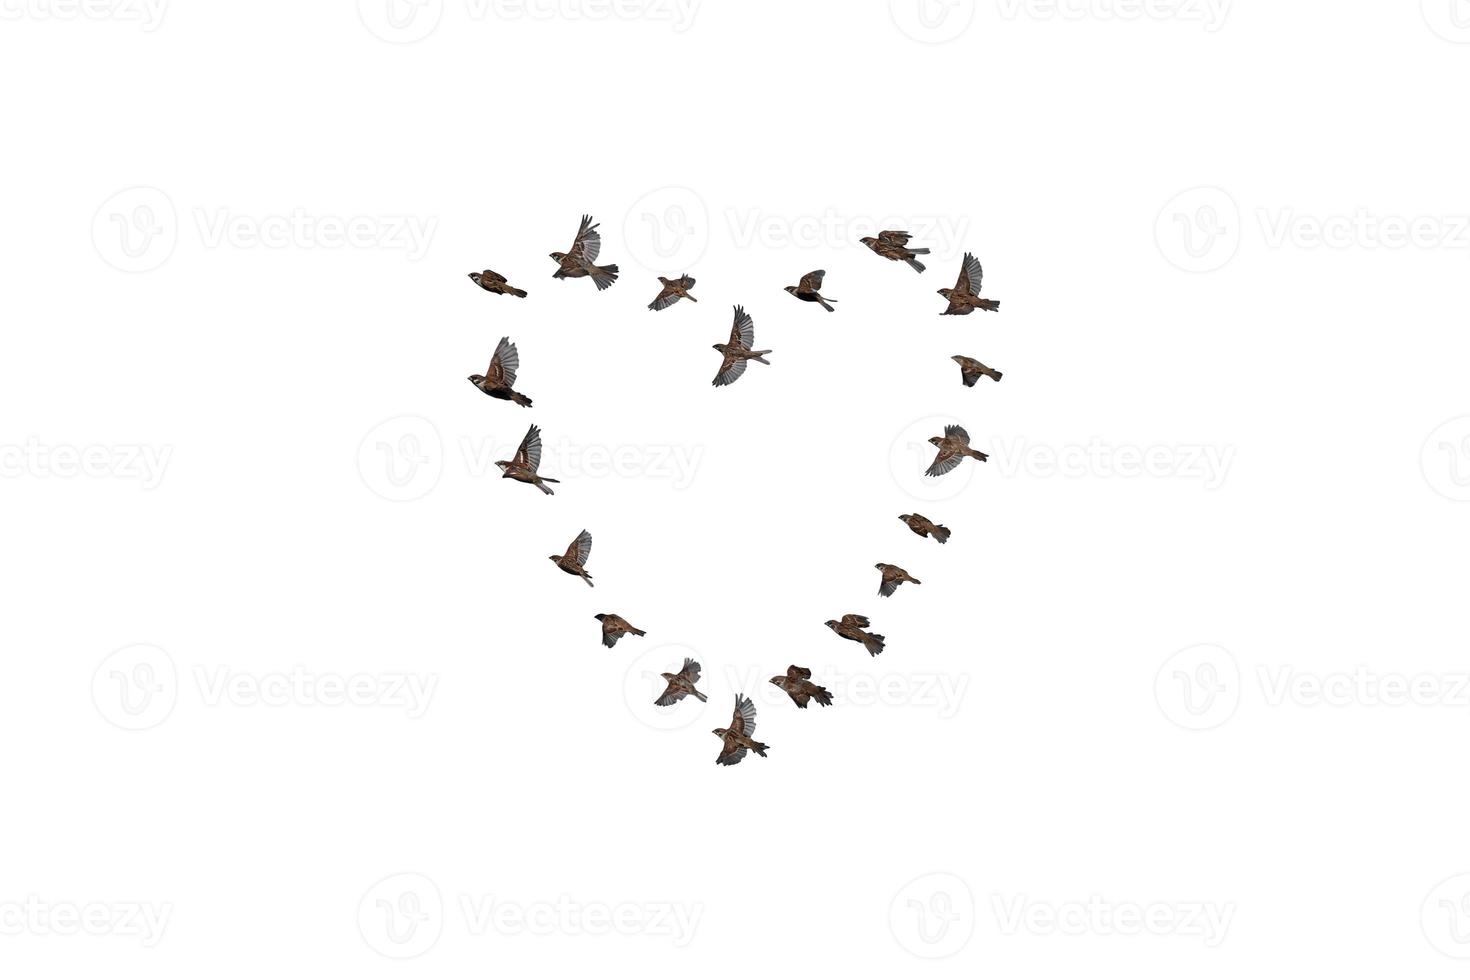 Sparrow flock flying in sky, love concept photo